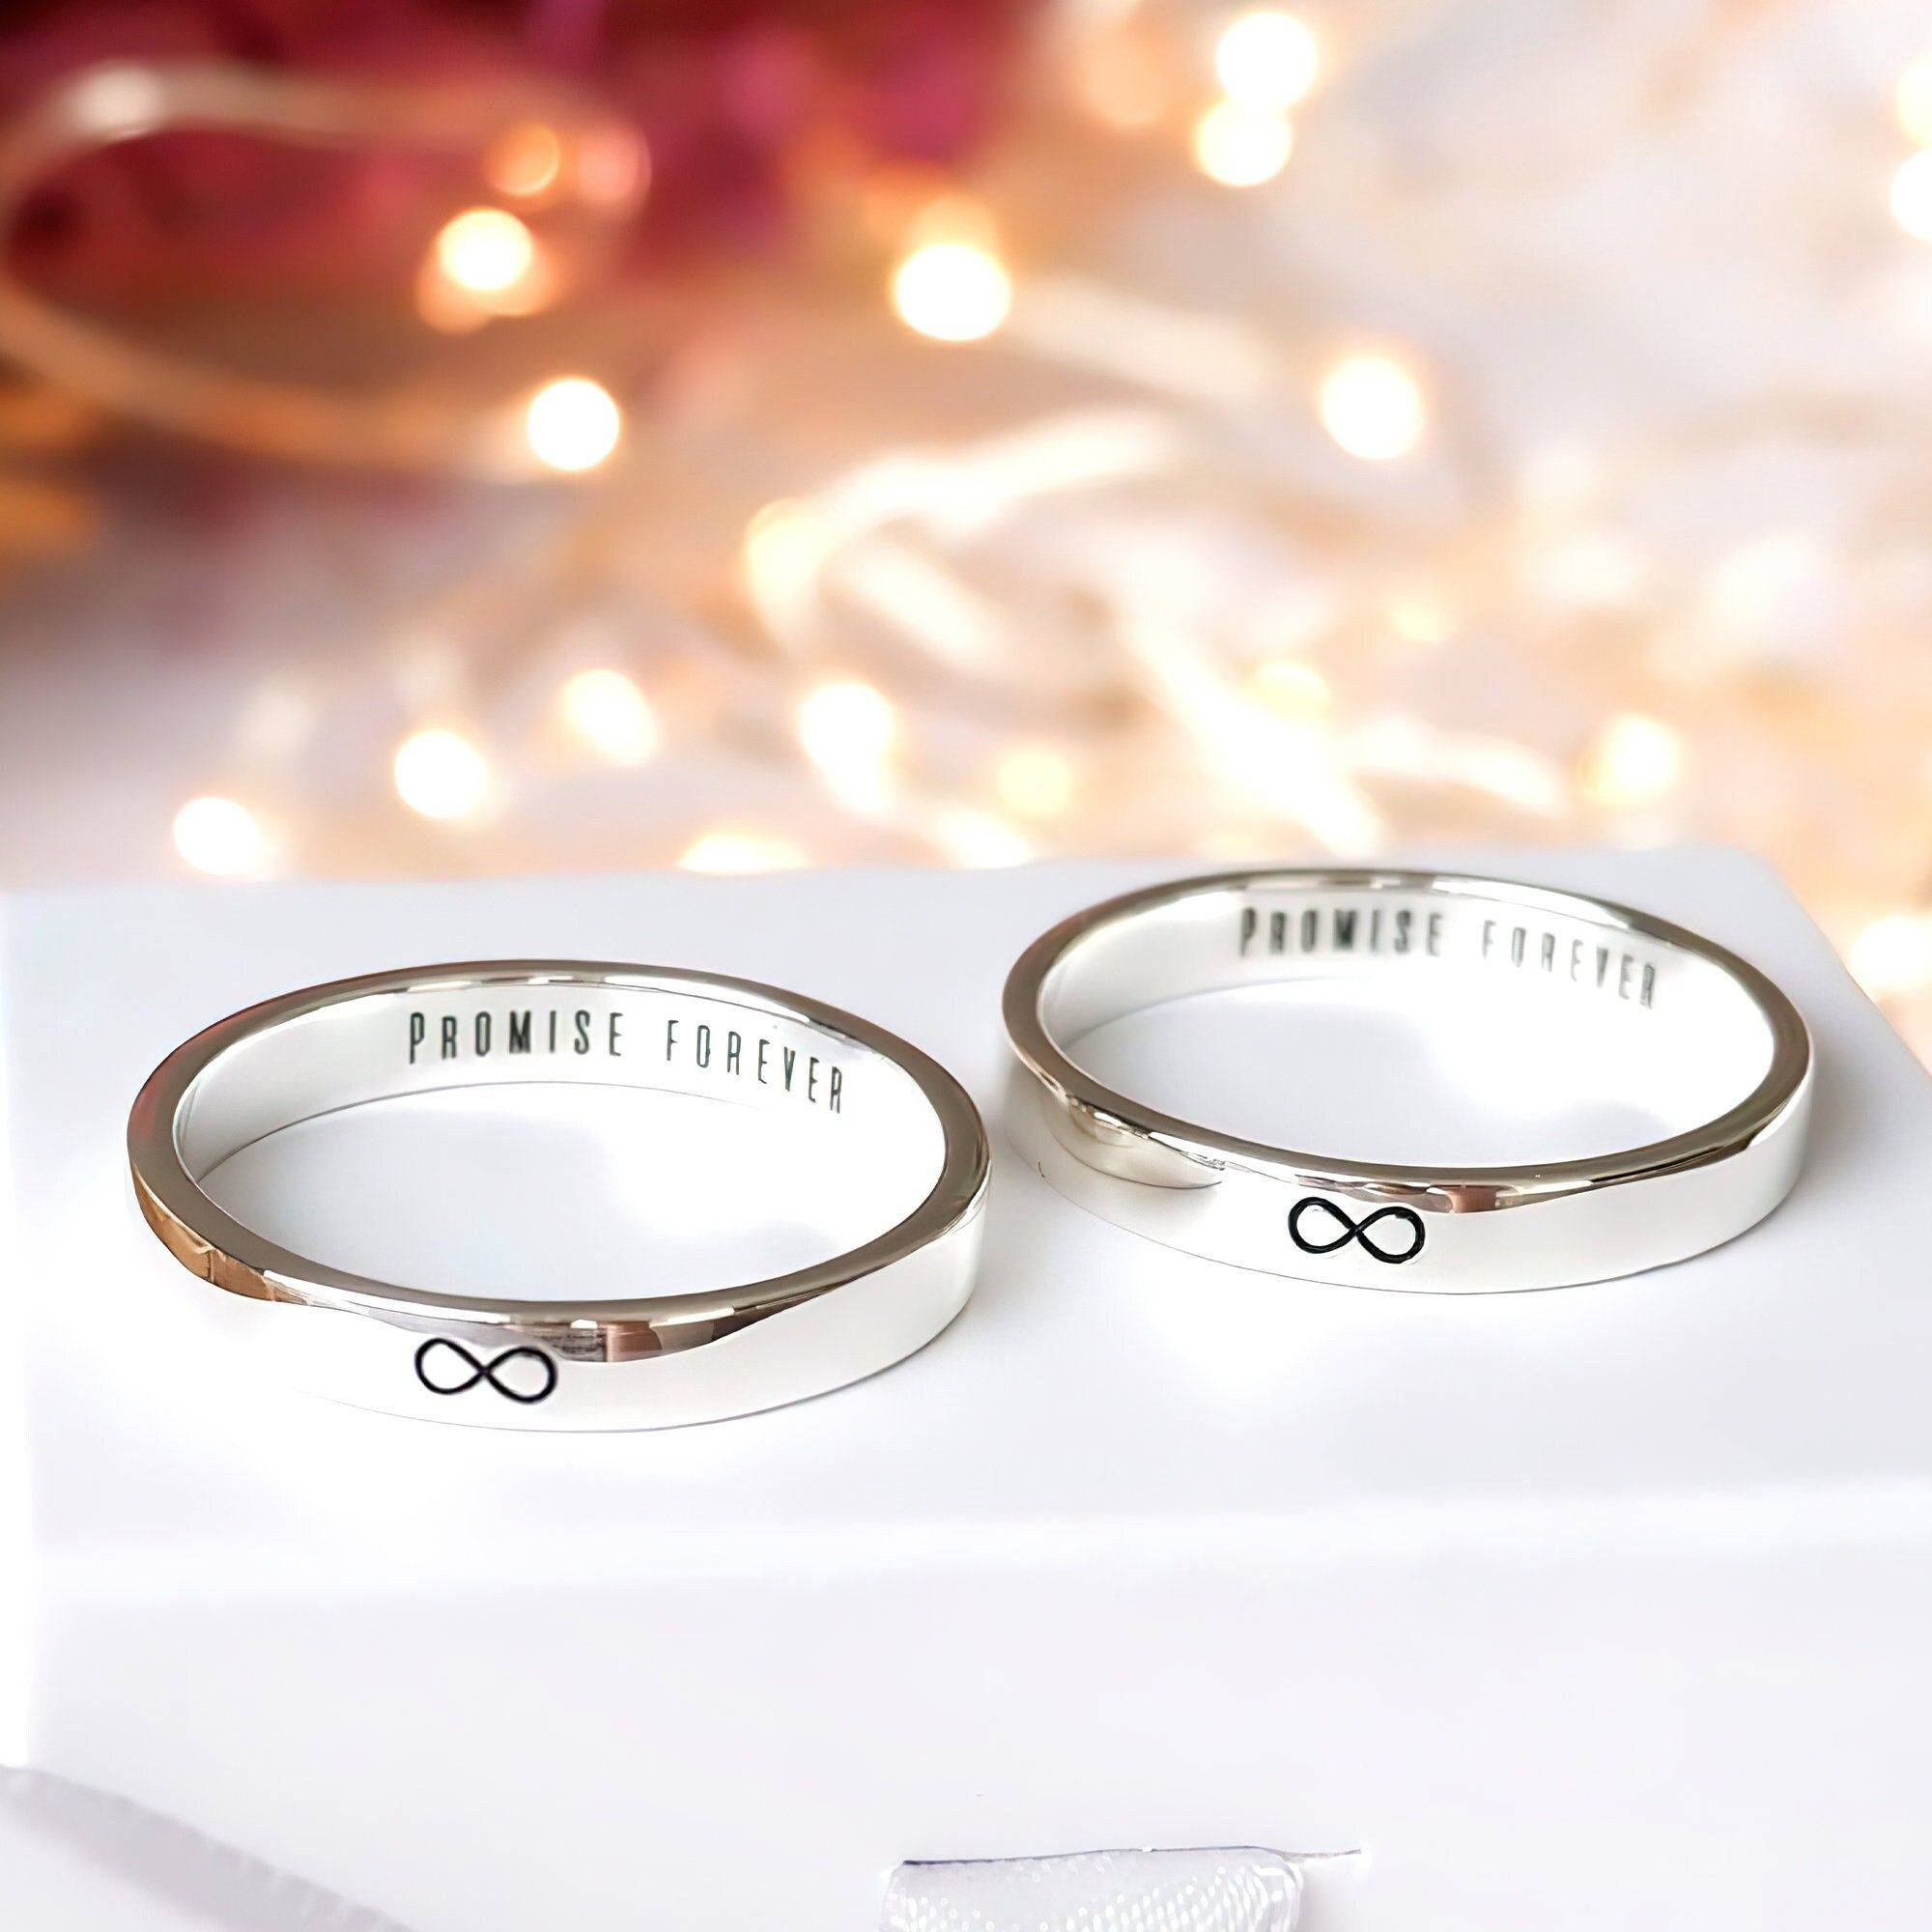 Rings For Couples: Celebrate Your Love with Matching Rings for Couples